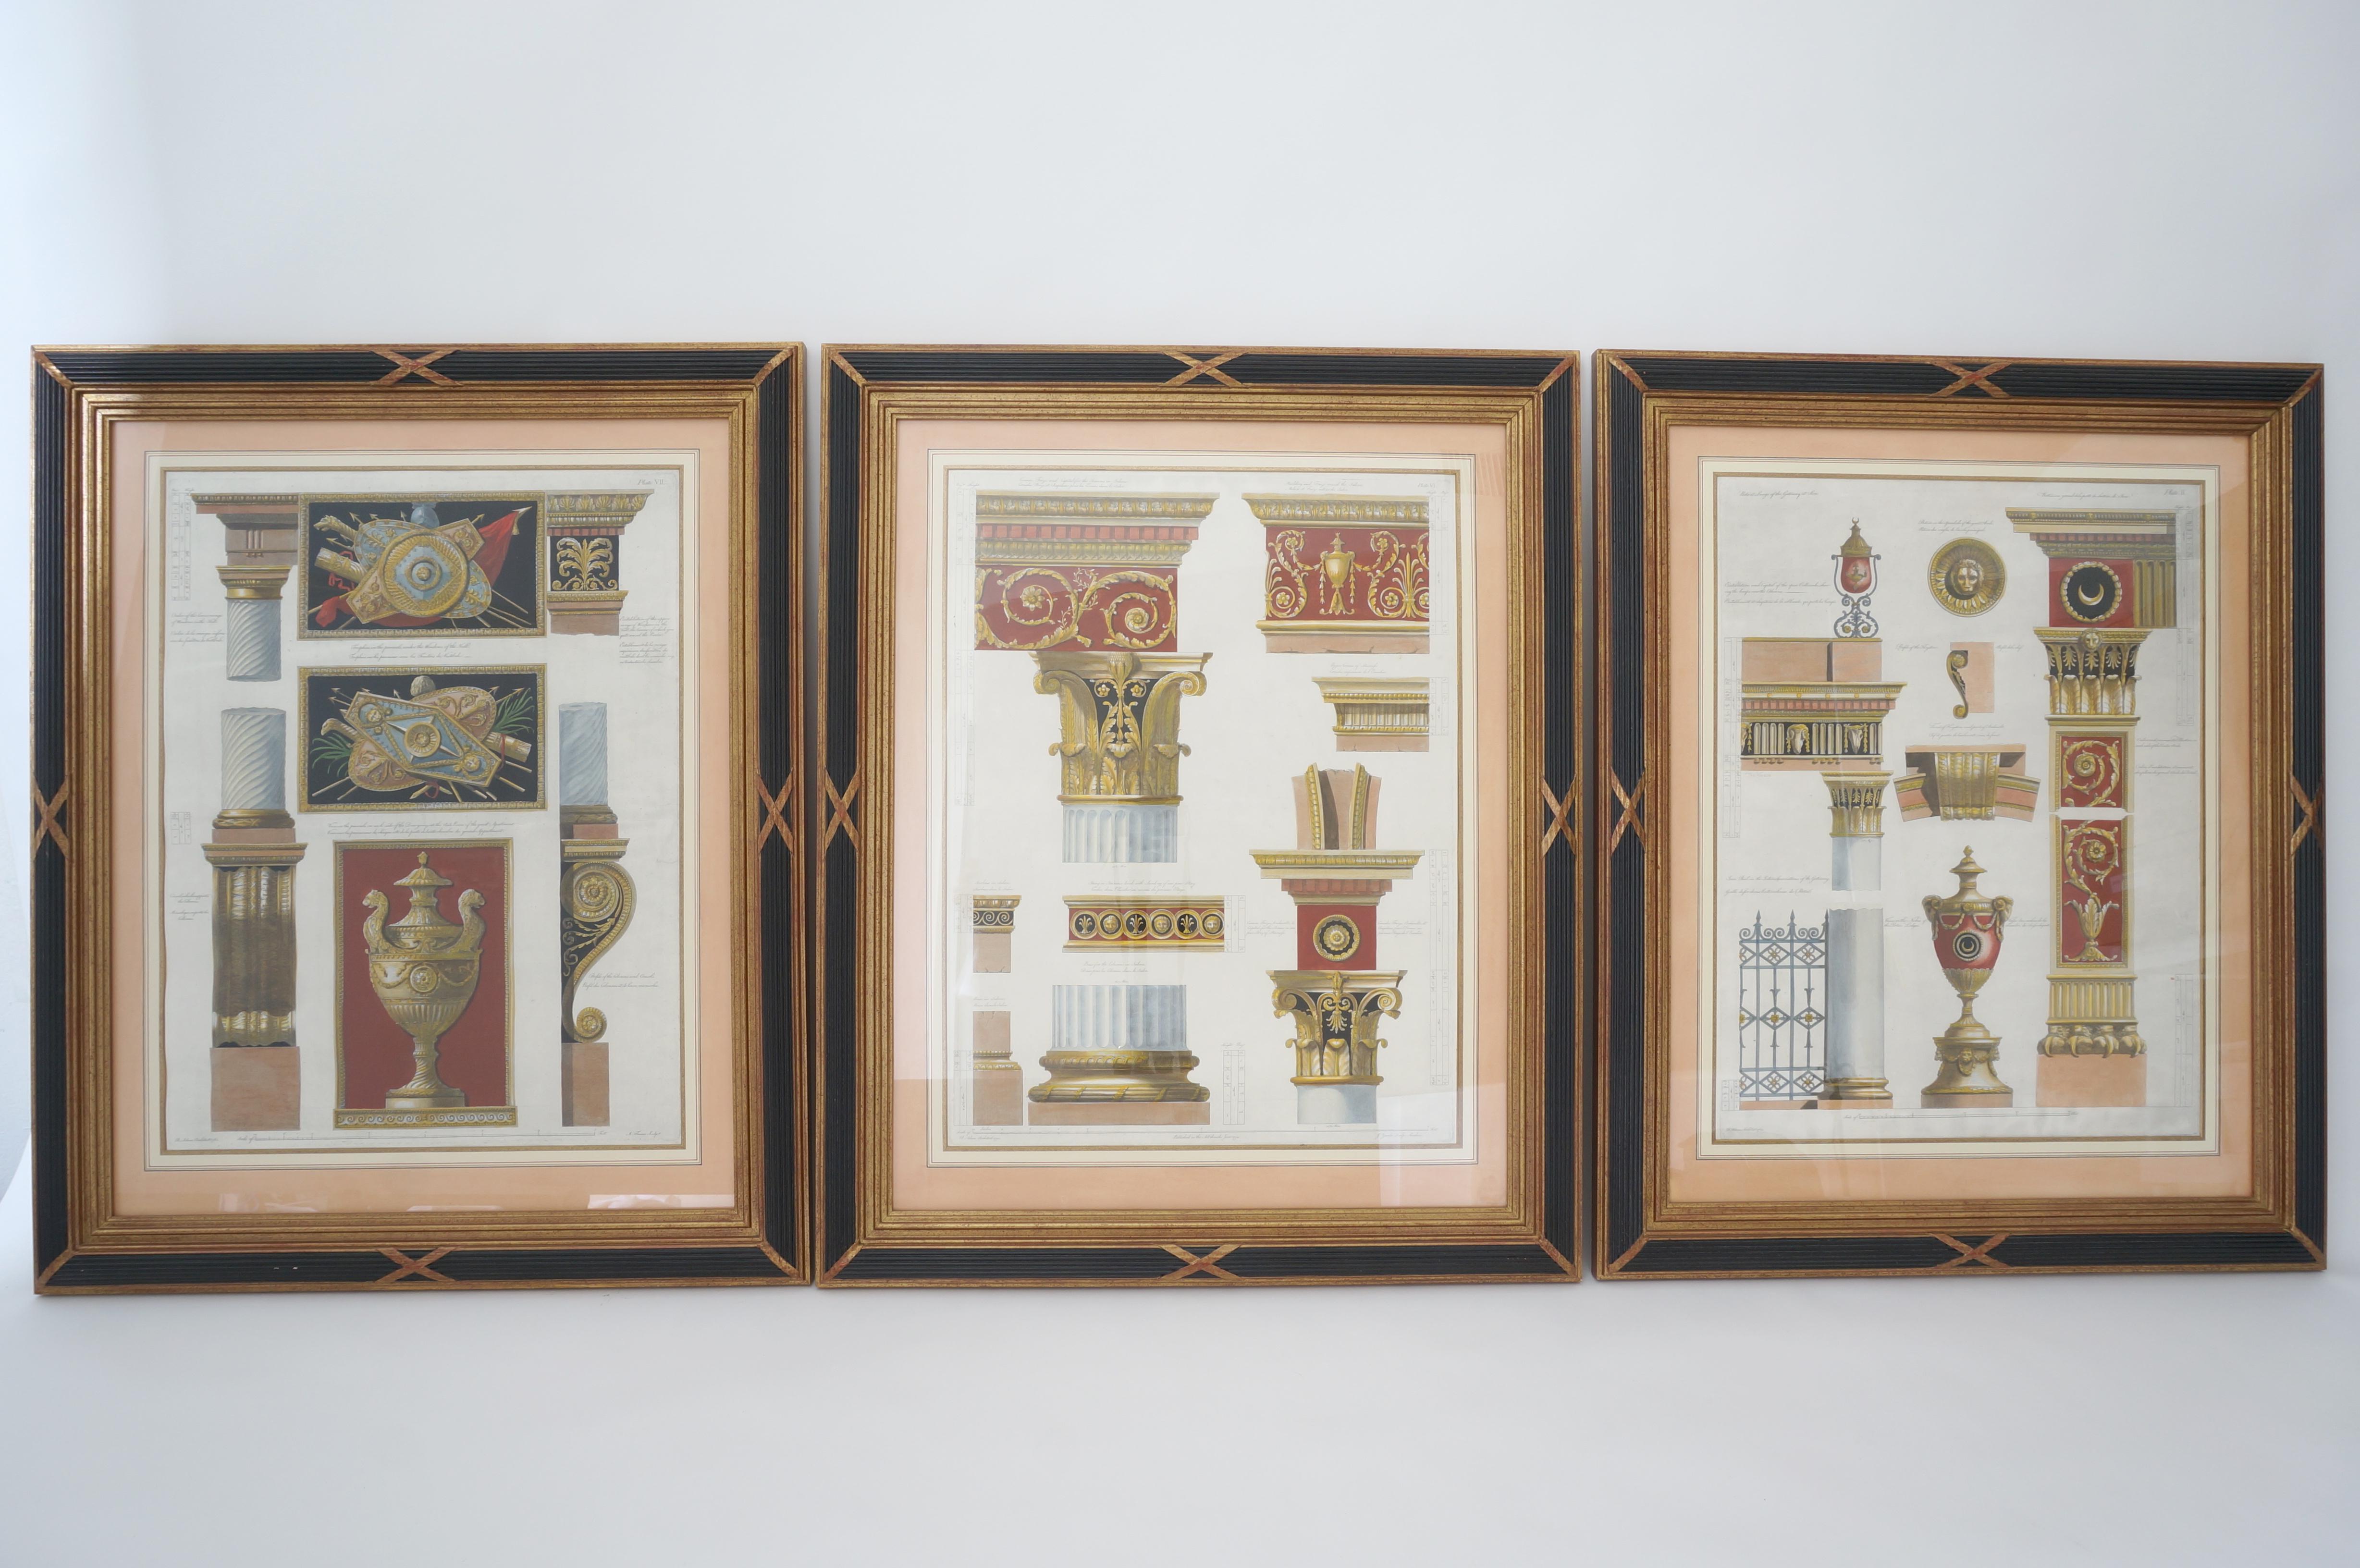 This stylish three piece set of neoclassical architectural elements will make a statement with their polychrome colorations, and their black and gold frames.

Note: Mat opening dimensions are 22.25